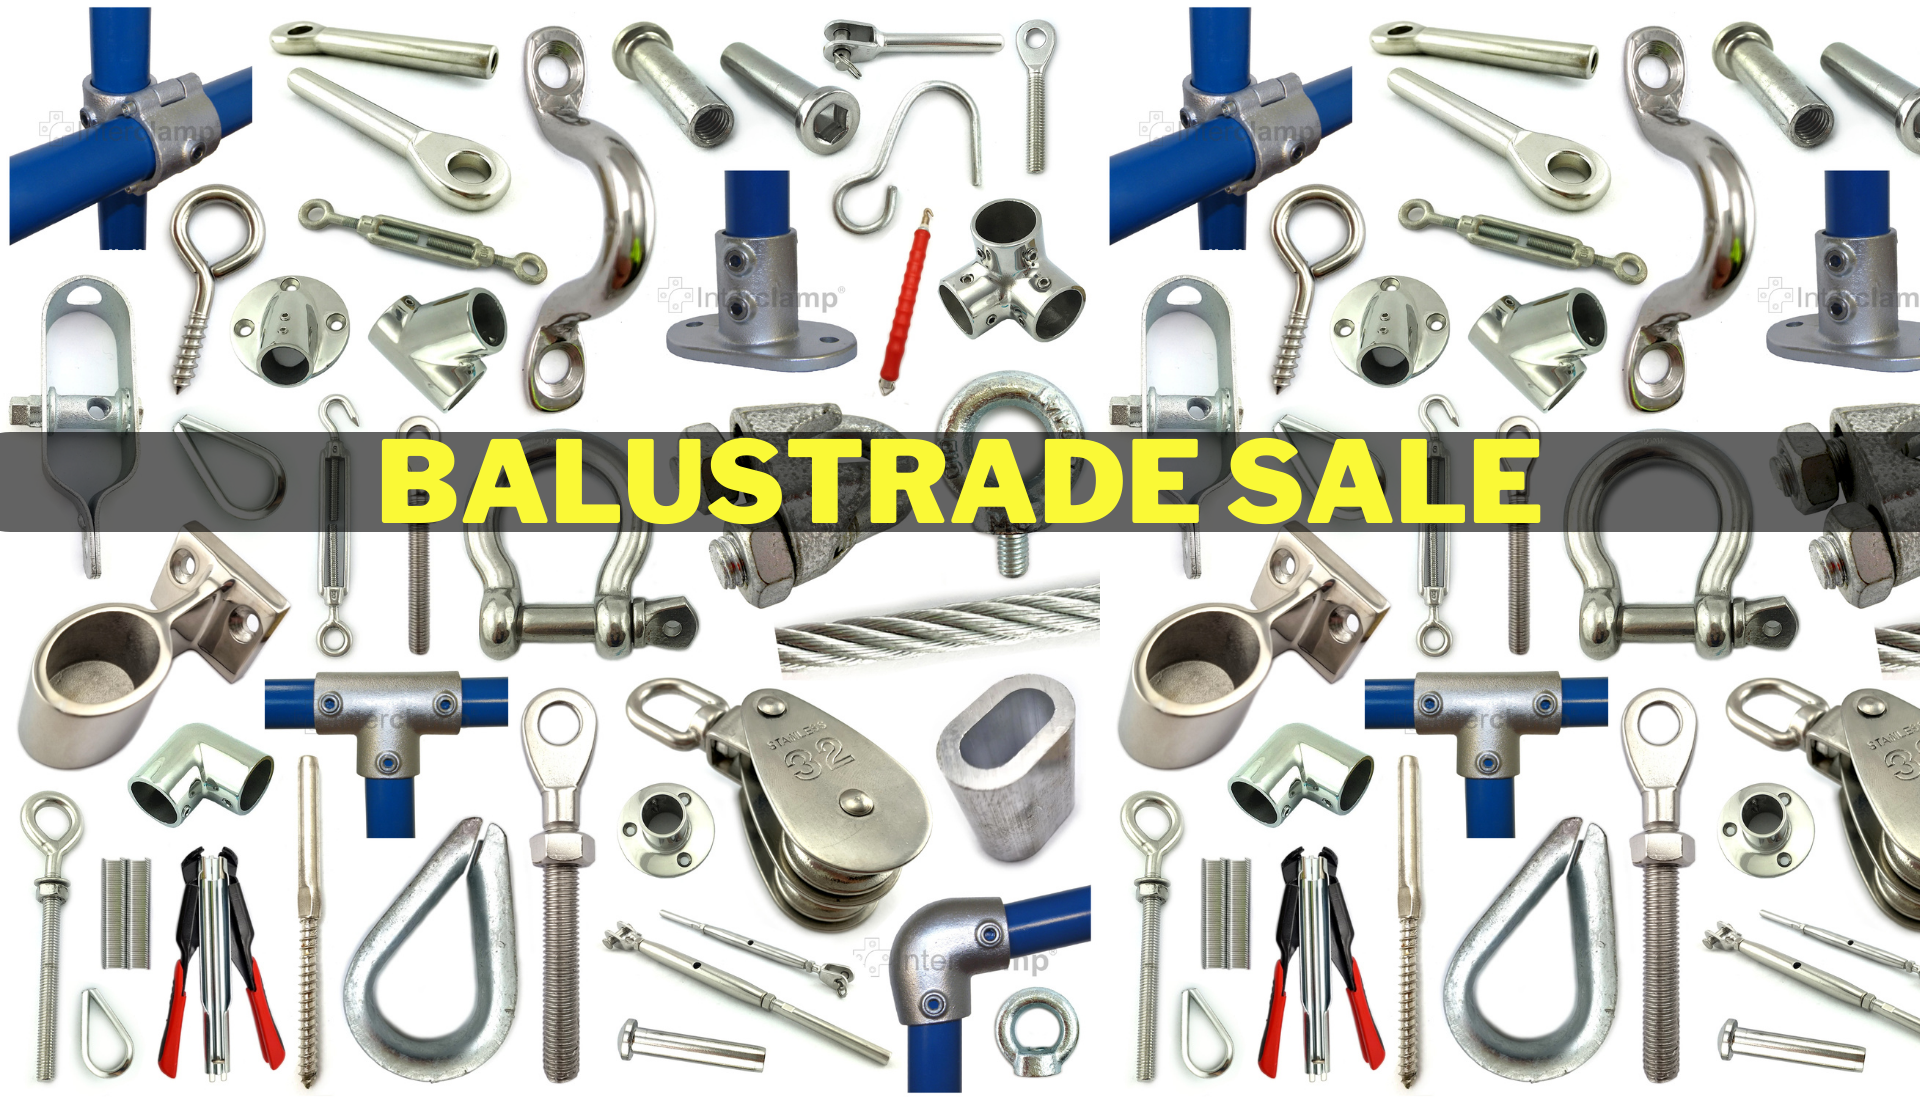 Balustrade SALE, 5% Off the Range - Hardware, Australia Wide Delivery with Chain.com.au coupon